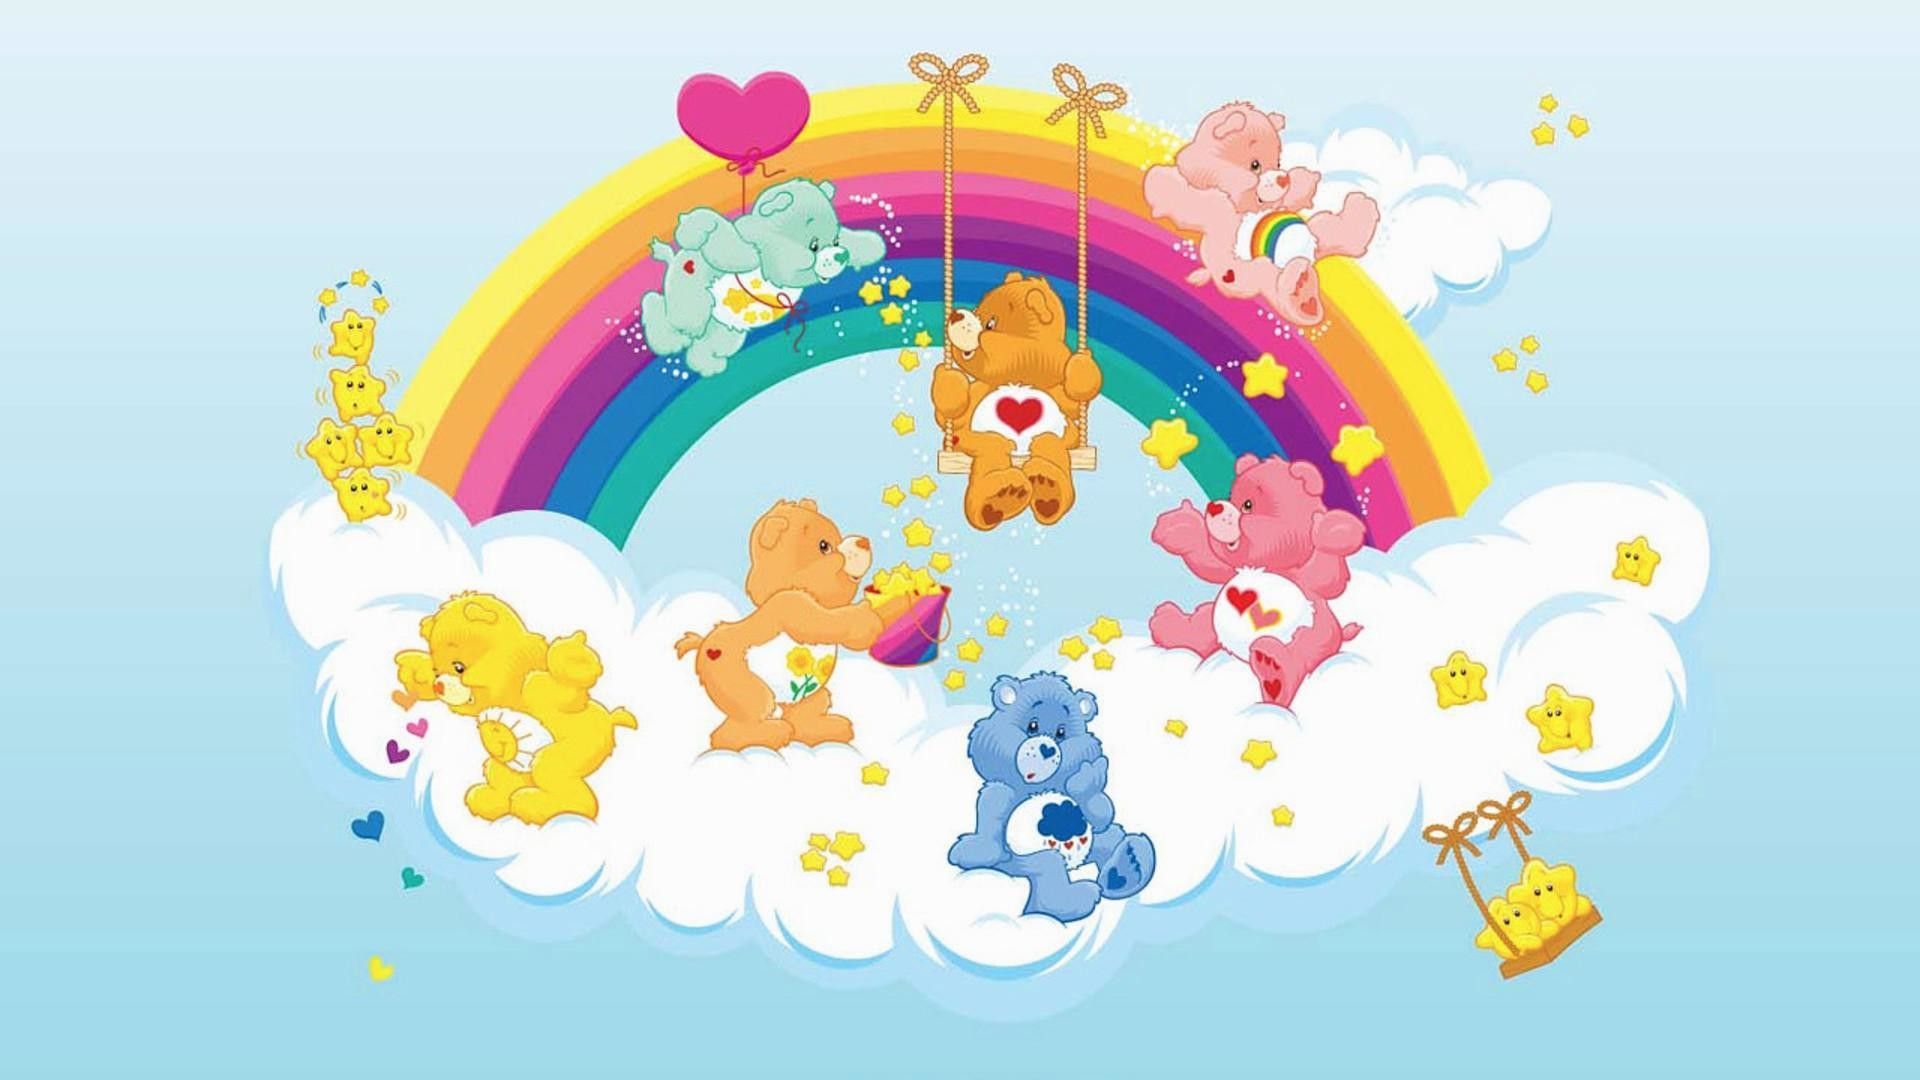 Download The Care Bears wallpapers for mobile phone free The Care Bears  HD pictures